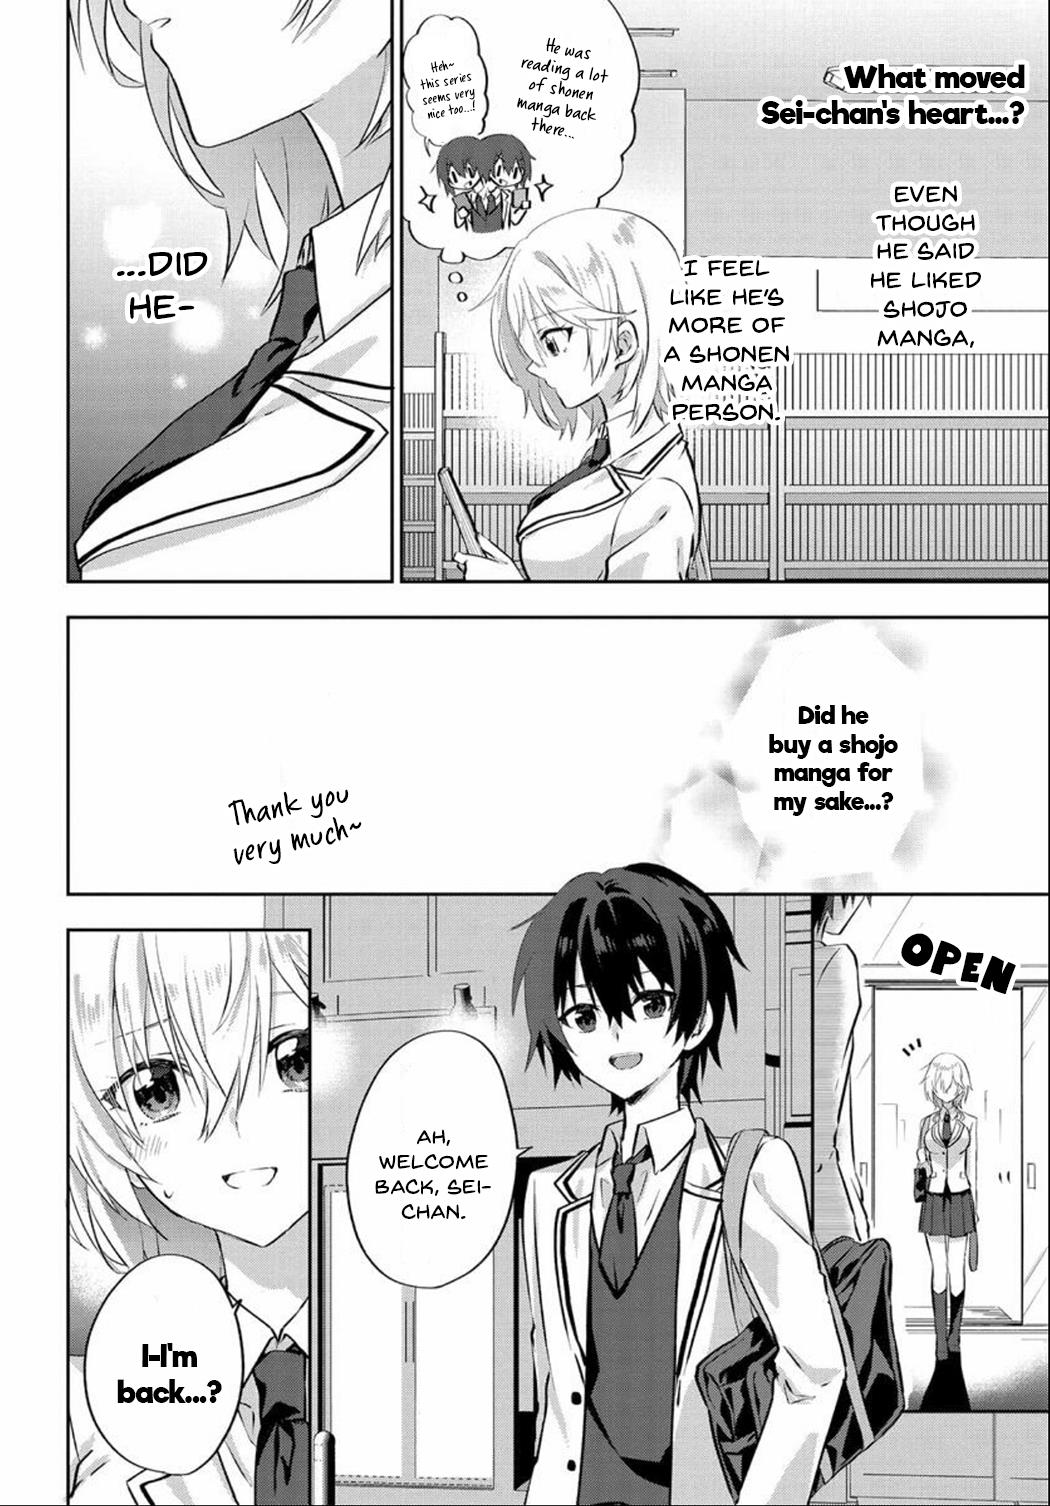 Since I’Ve Entered The World Of Romantic Comedy Manga, I’Ll Do My Best To Make The Losing Heroine Happy Chapter 5.2 #1